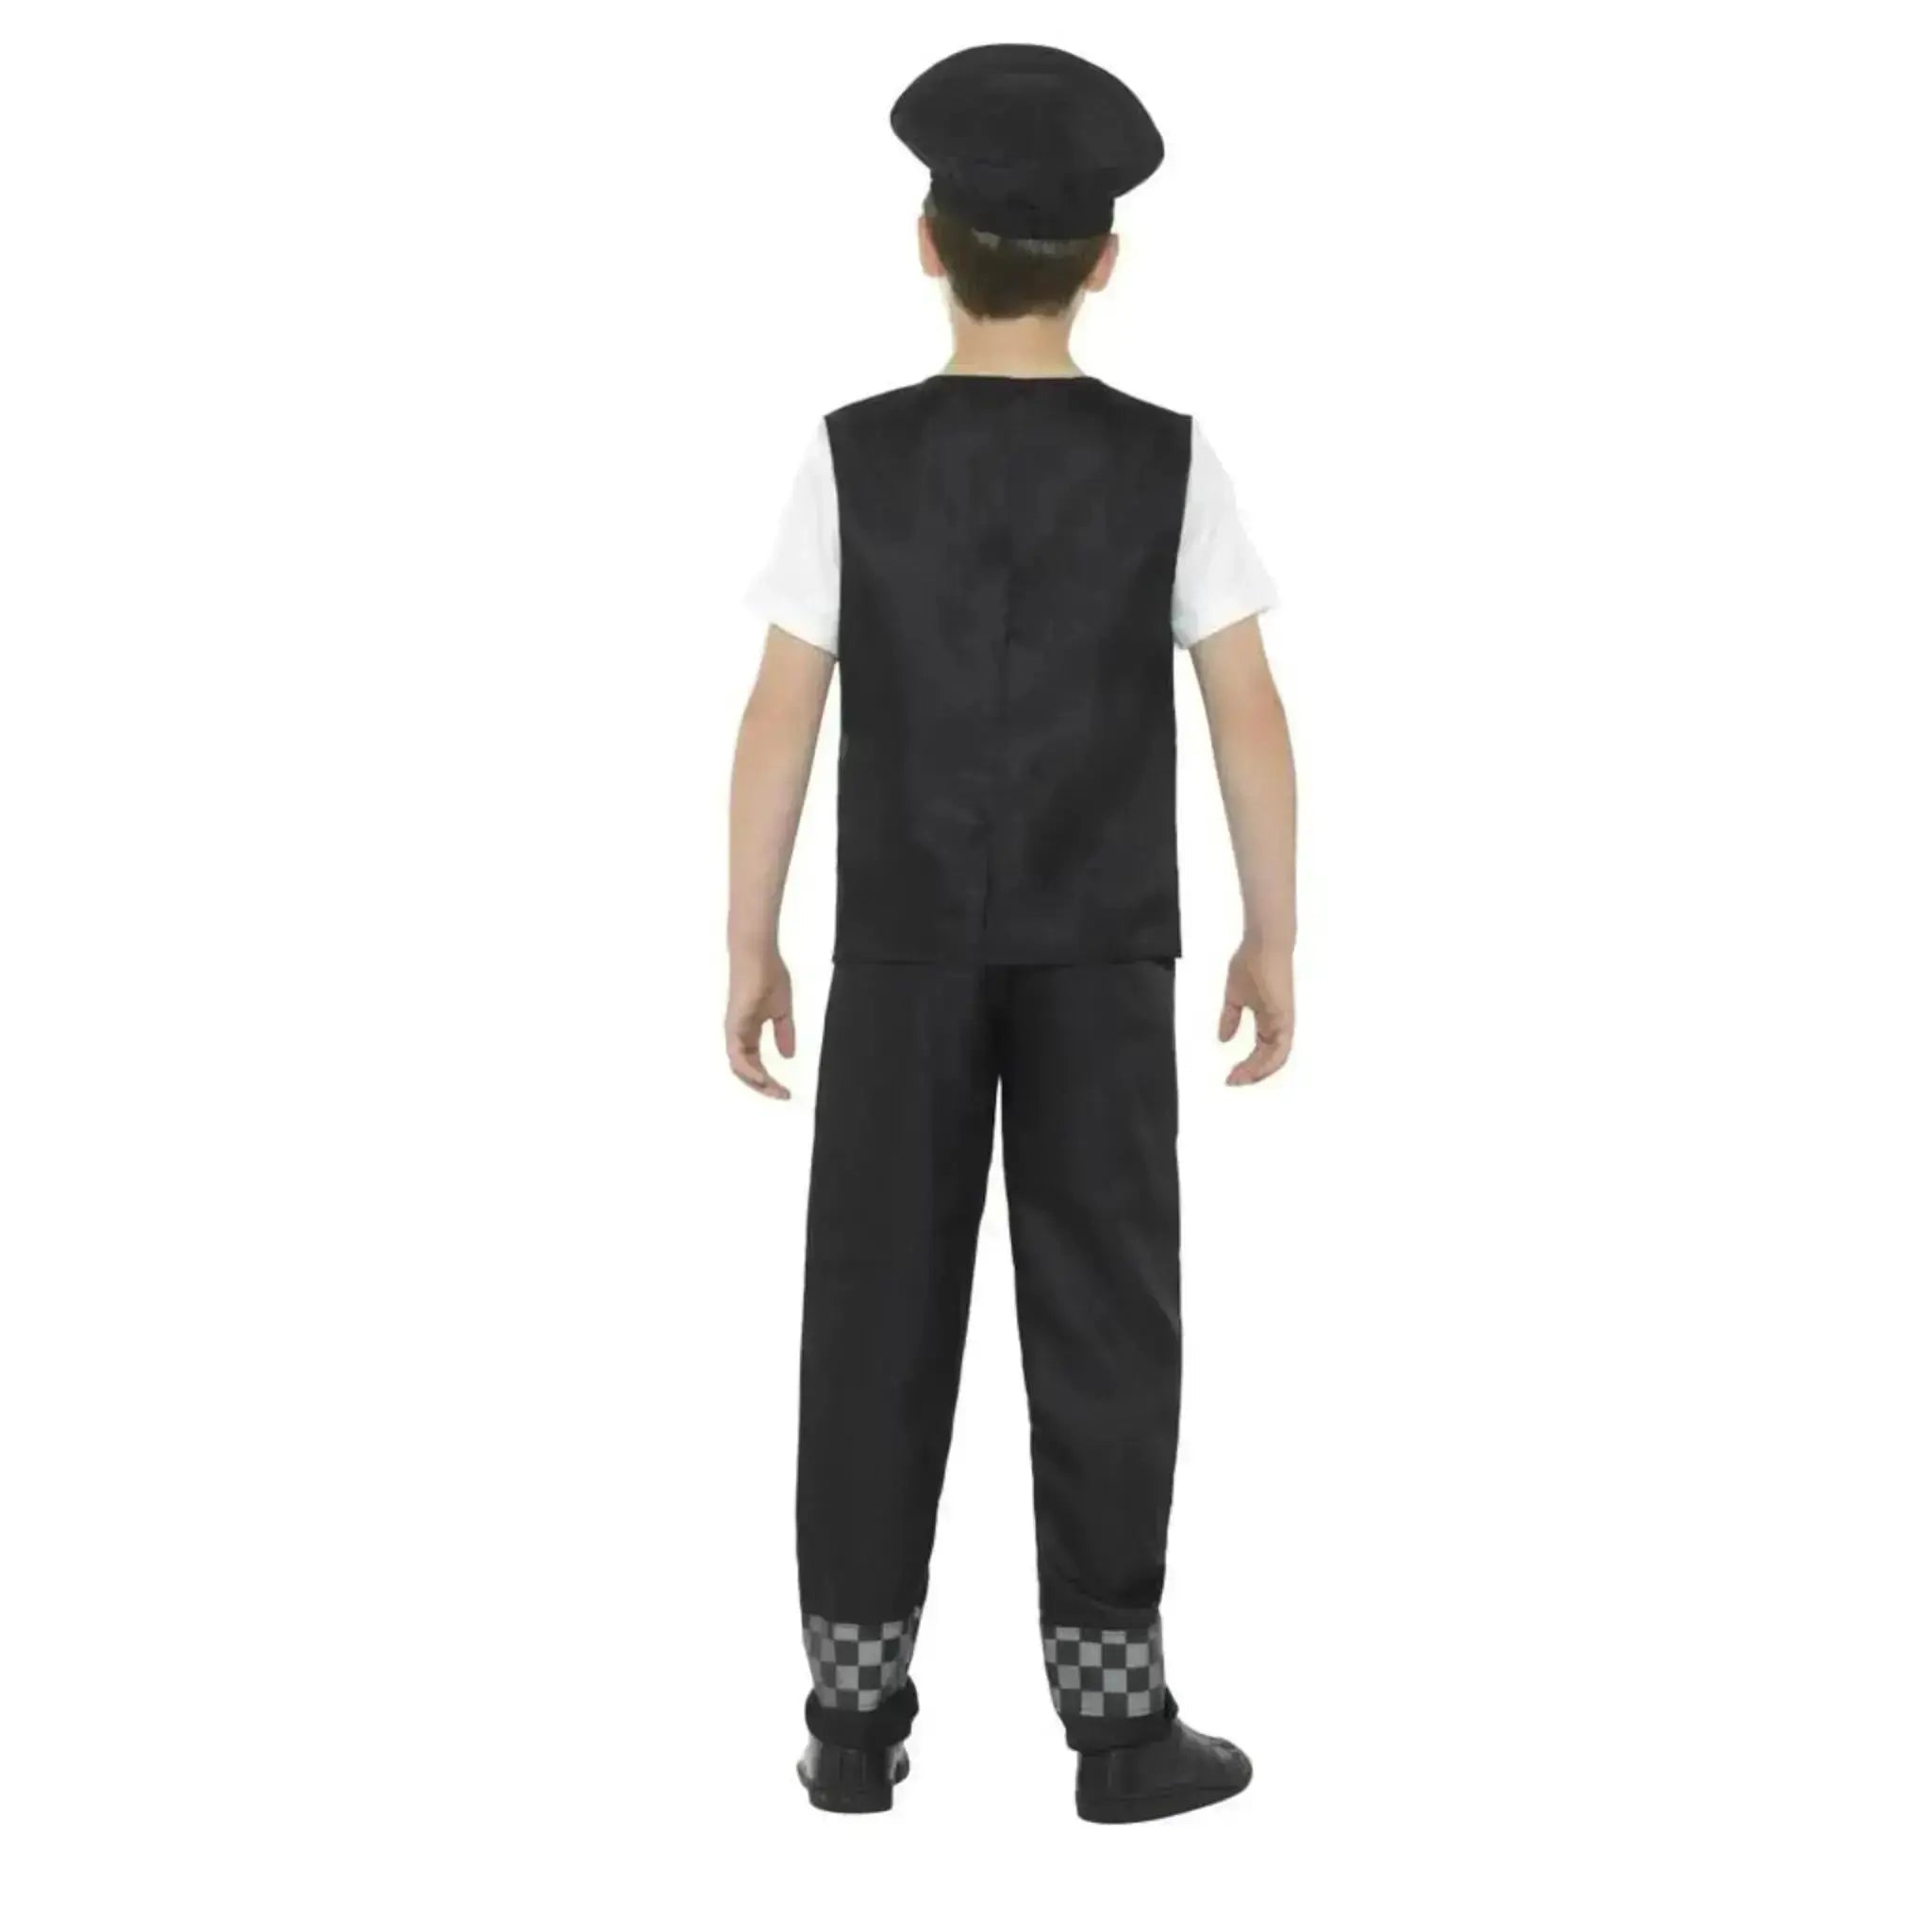 Police Costume (Kids) | The Party Hut